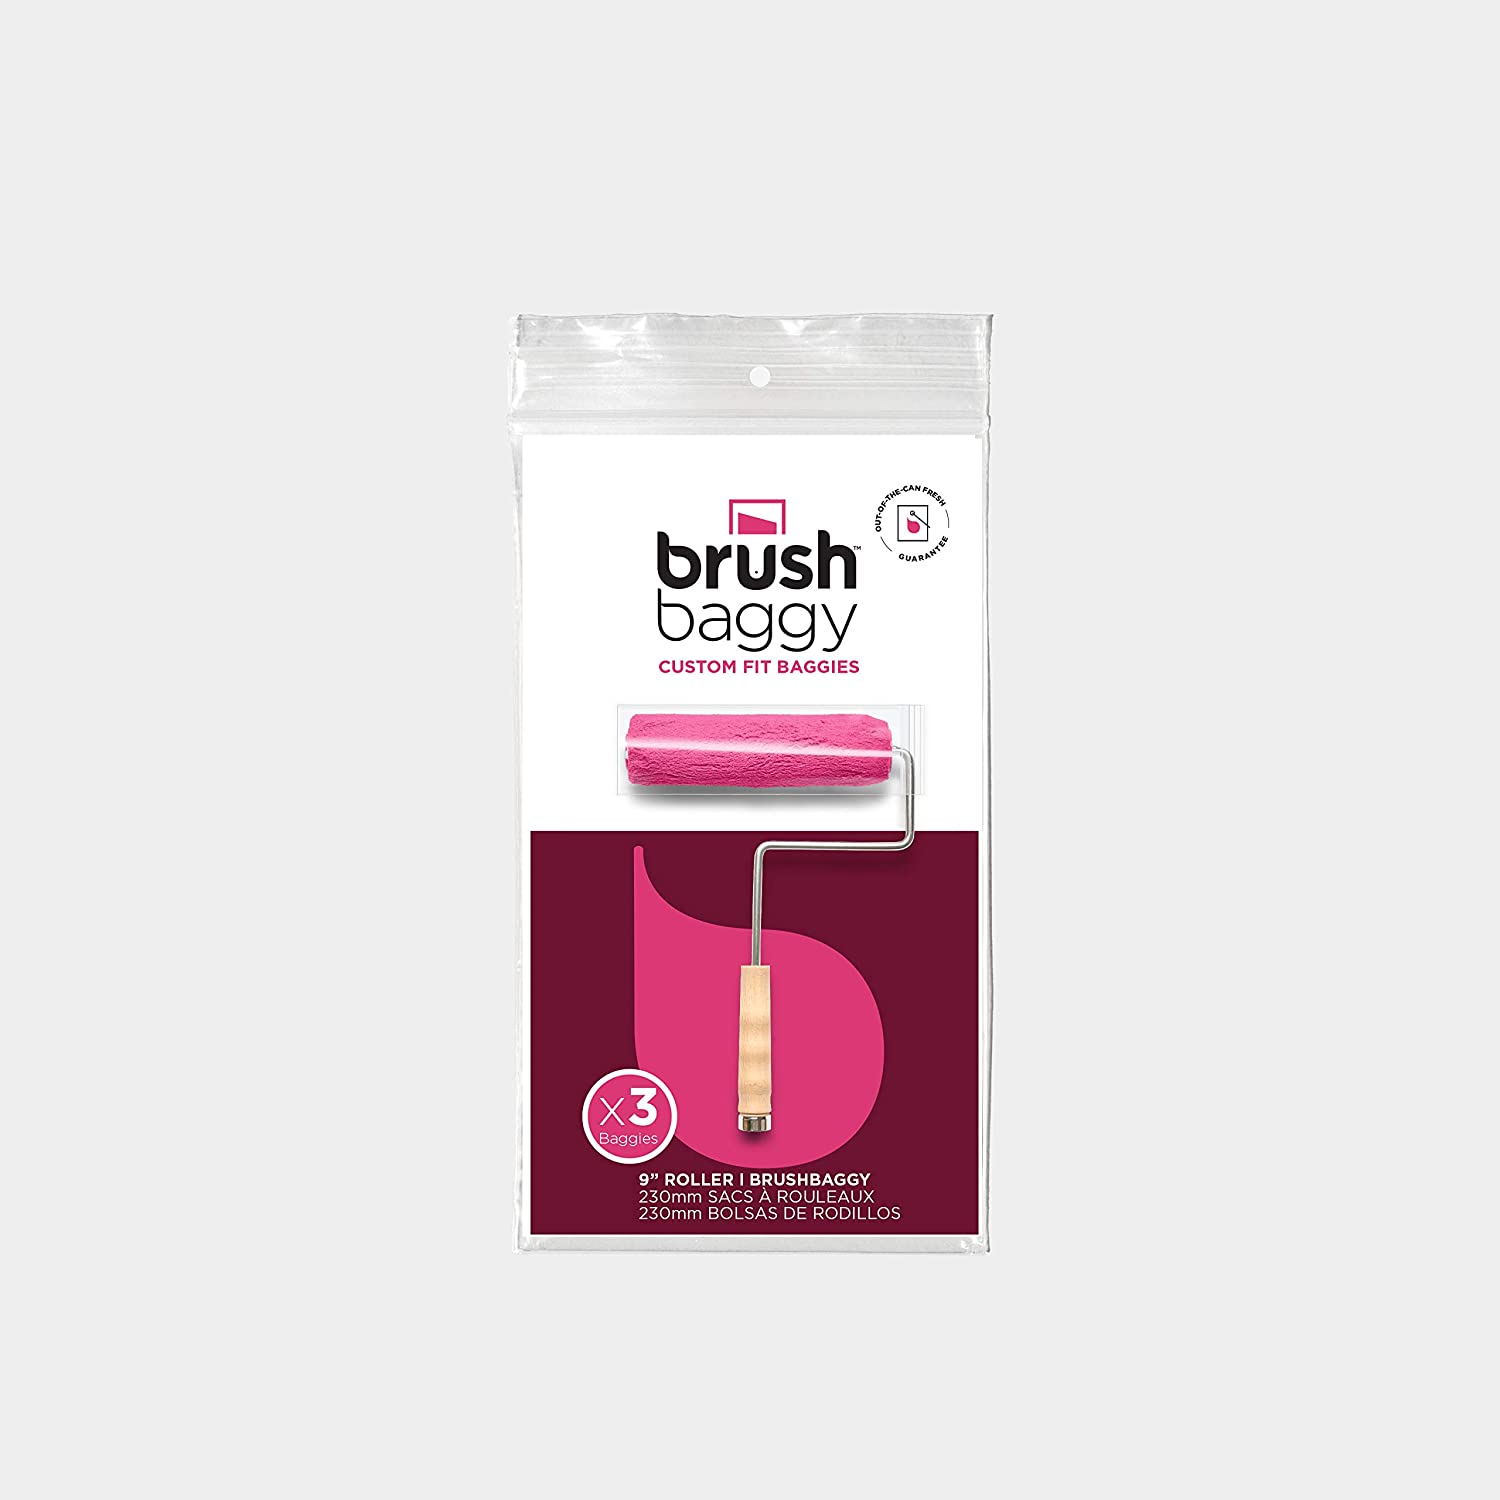 brush baggy 9" roller cover 3pk -00012-Exeter Paint Stores